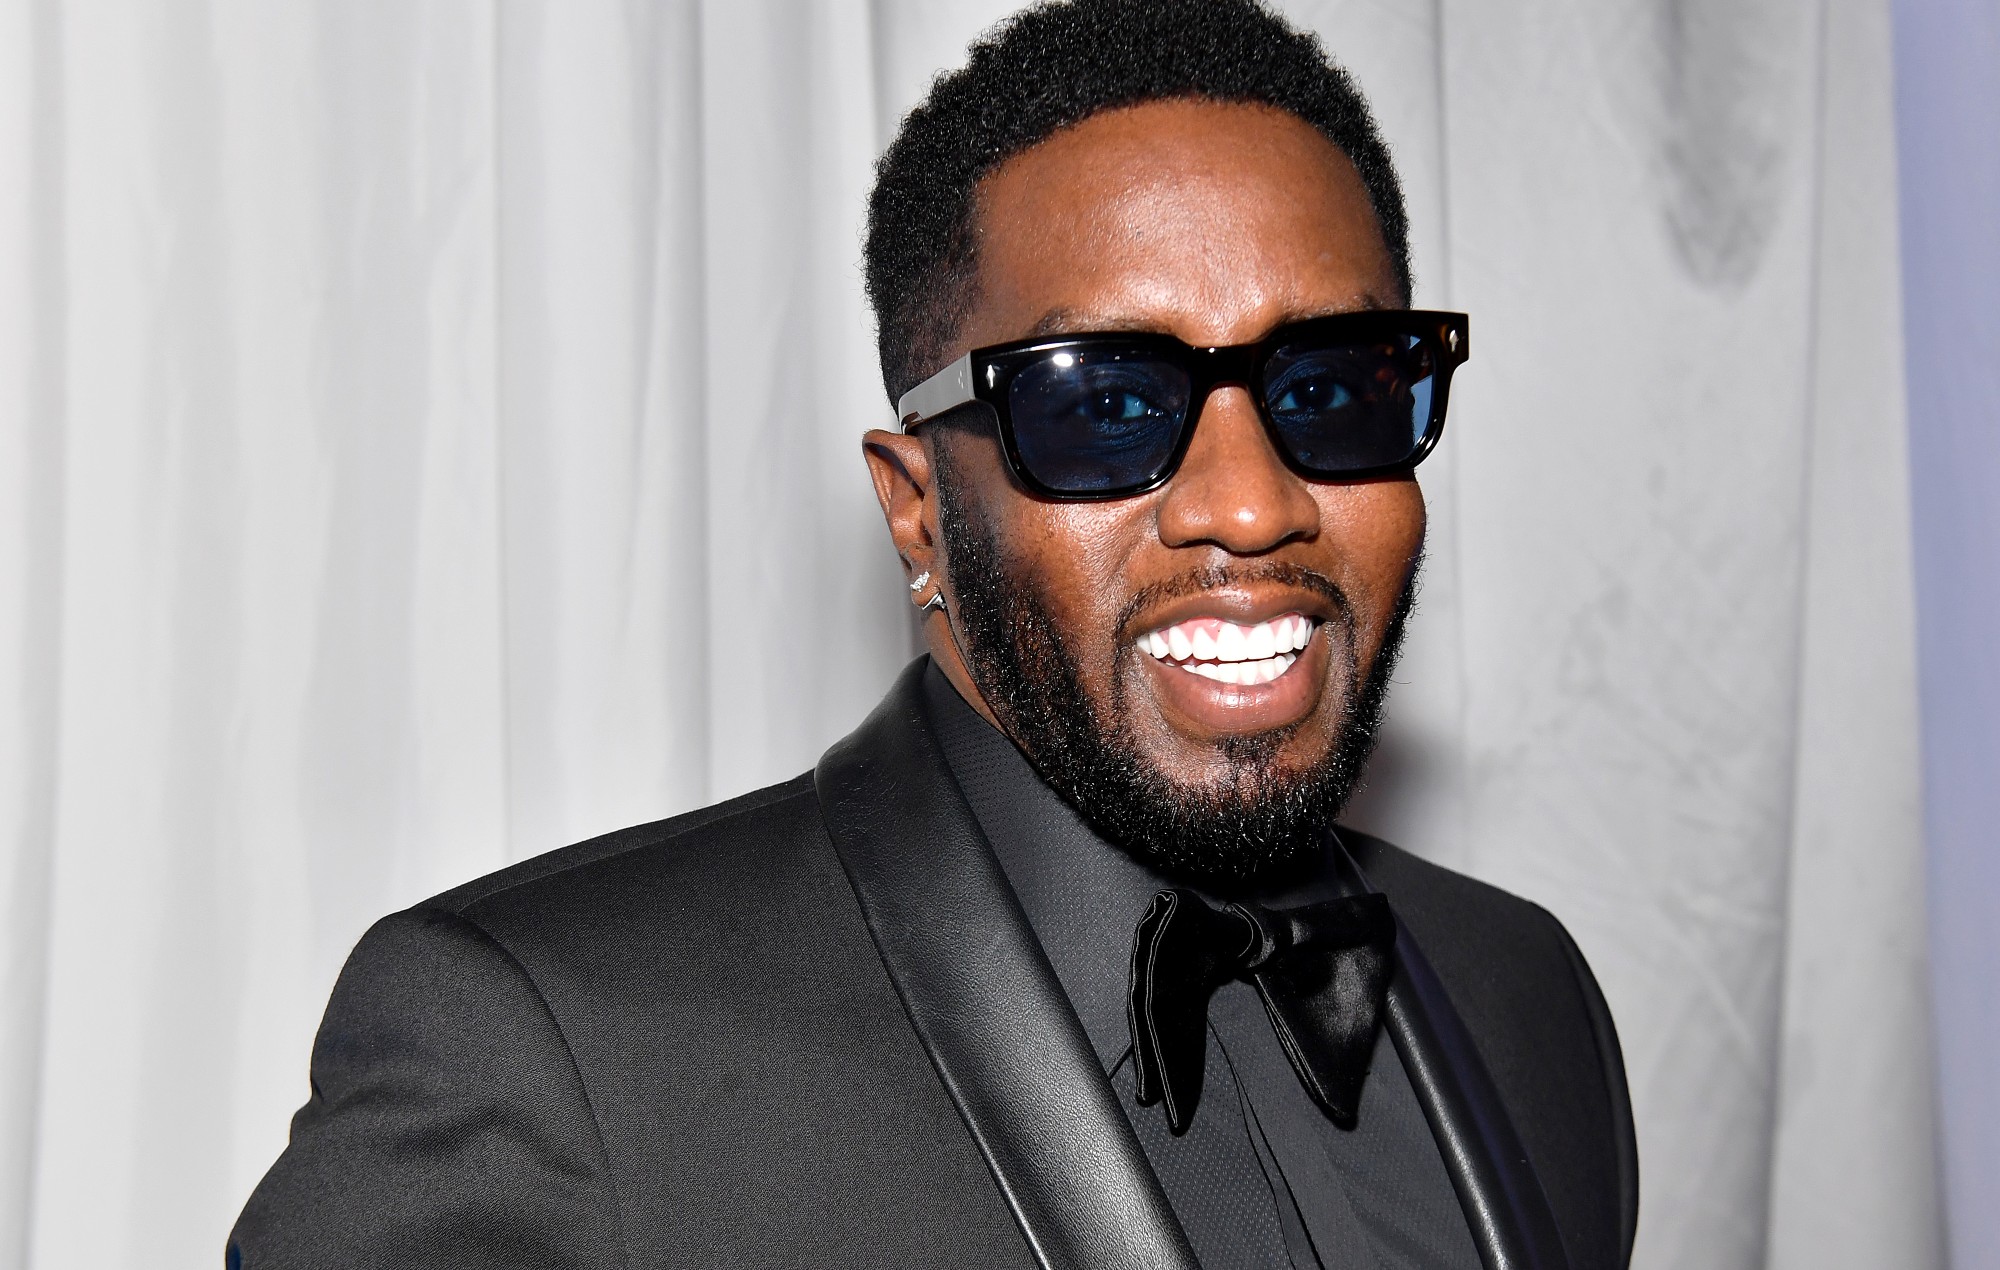 Sean ‘Diddy’ Combs accused of drugging, sexually assaulting woman in new “revenge porn” lawsuit